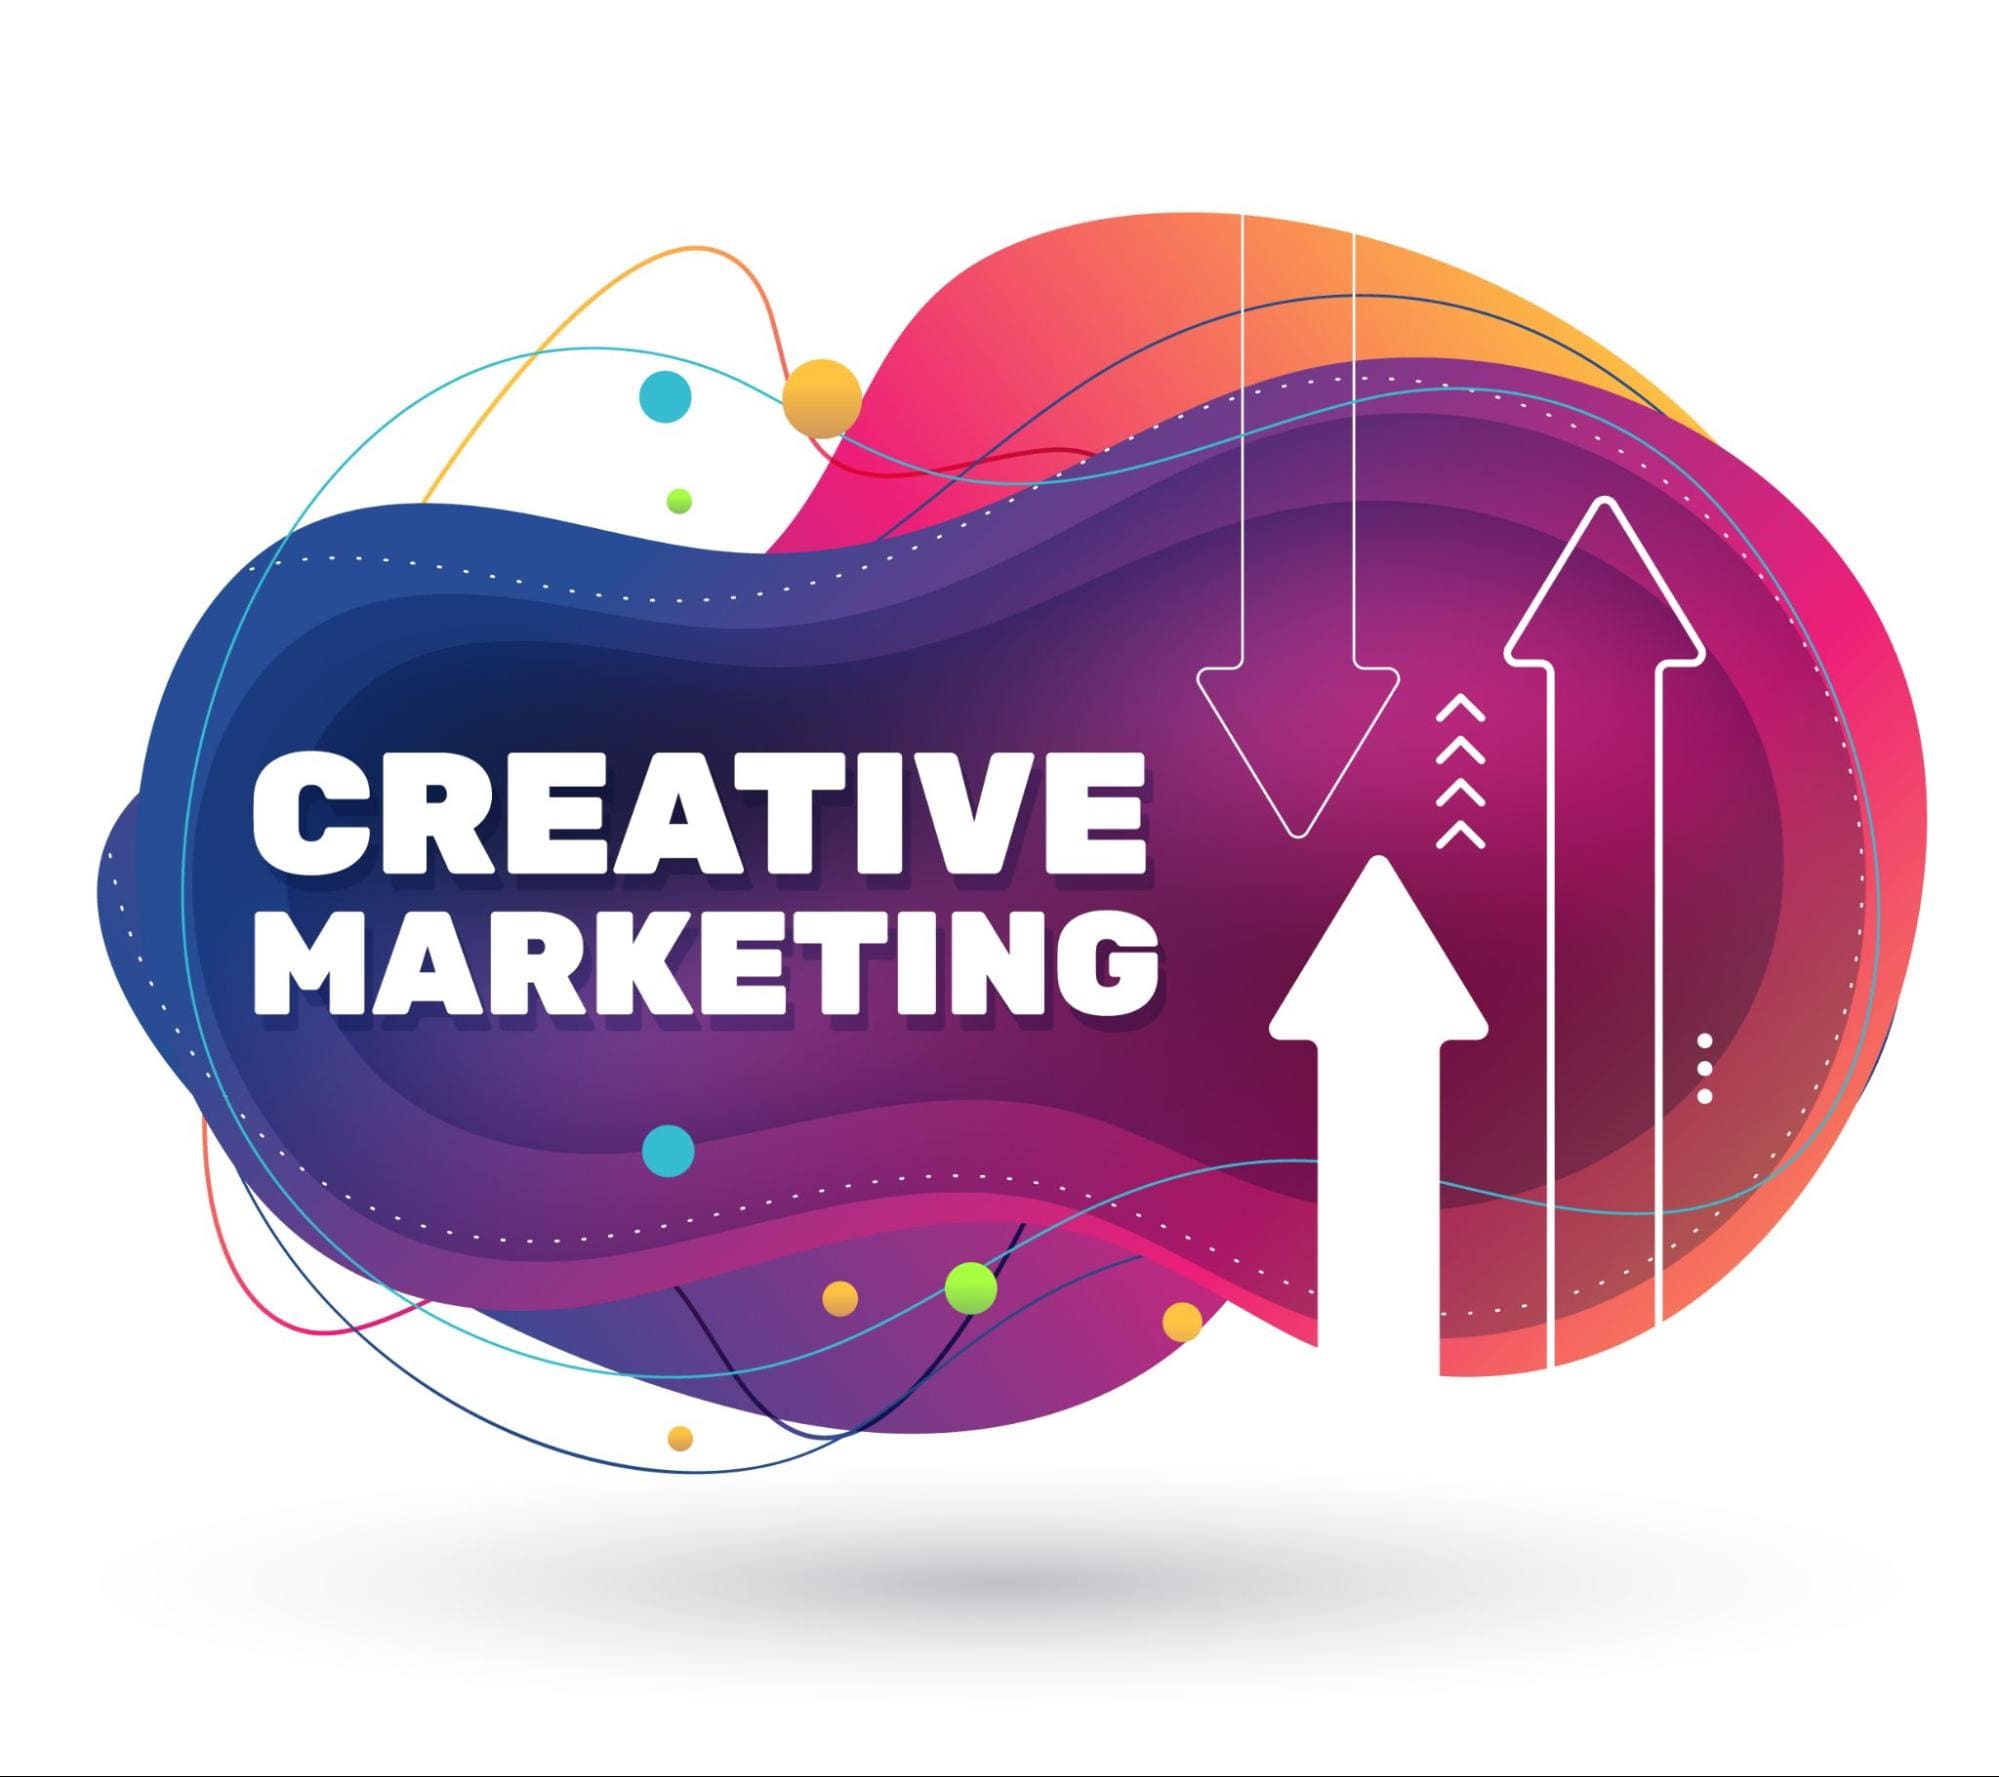 What is Creative? Significant Opportunities for Creative Marketing in the Industry 4.0 Era